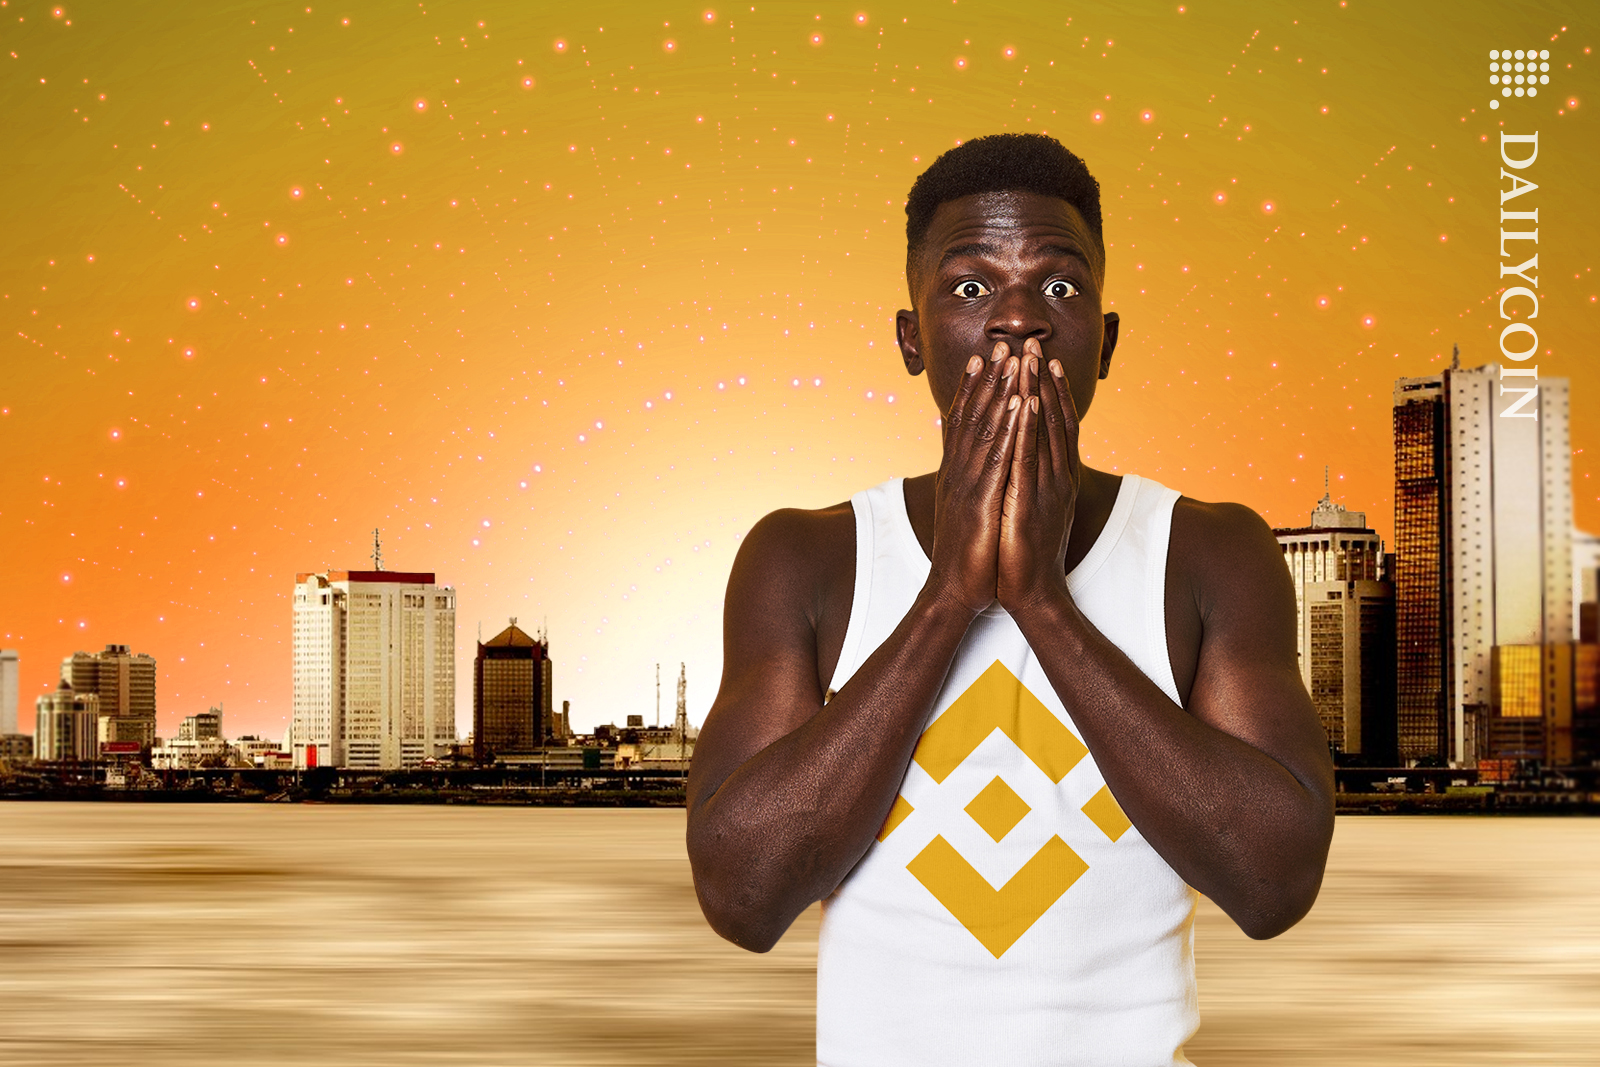 Guy in a vest top in Lagos, Nigeria shocked what Binance did.